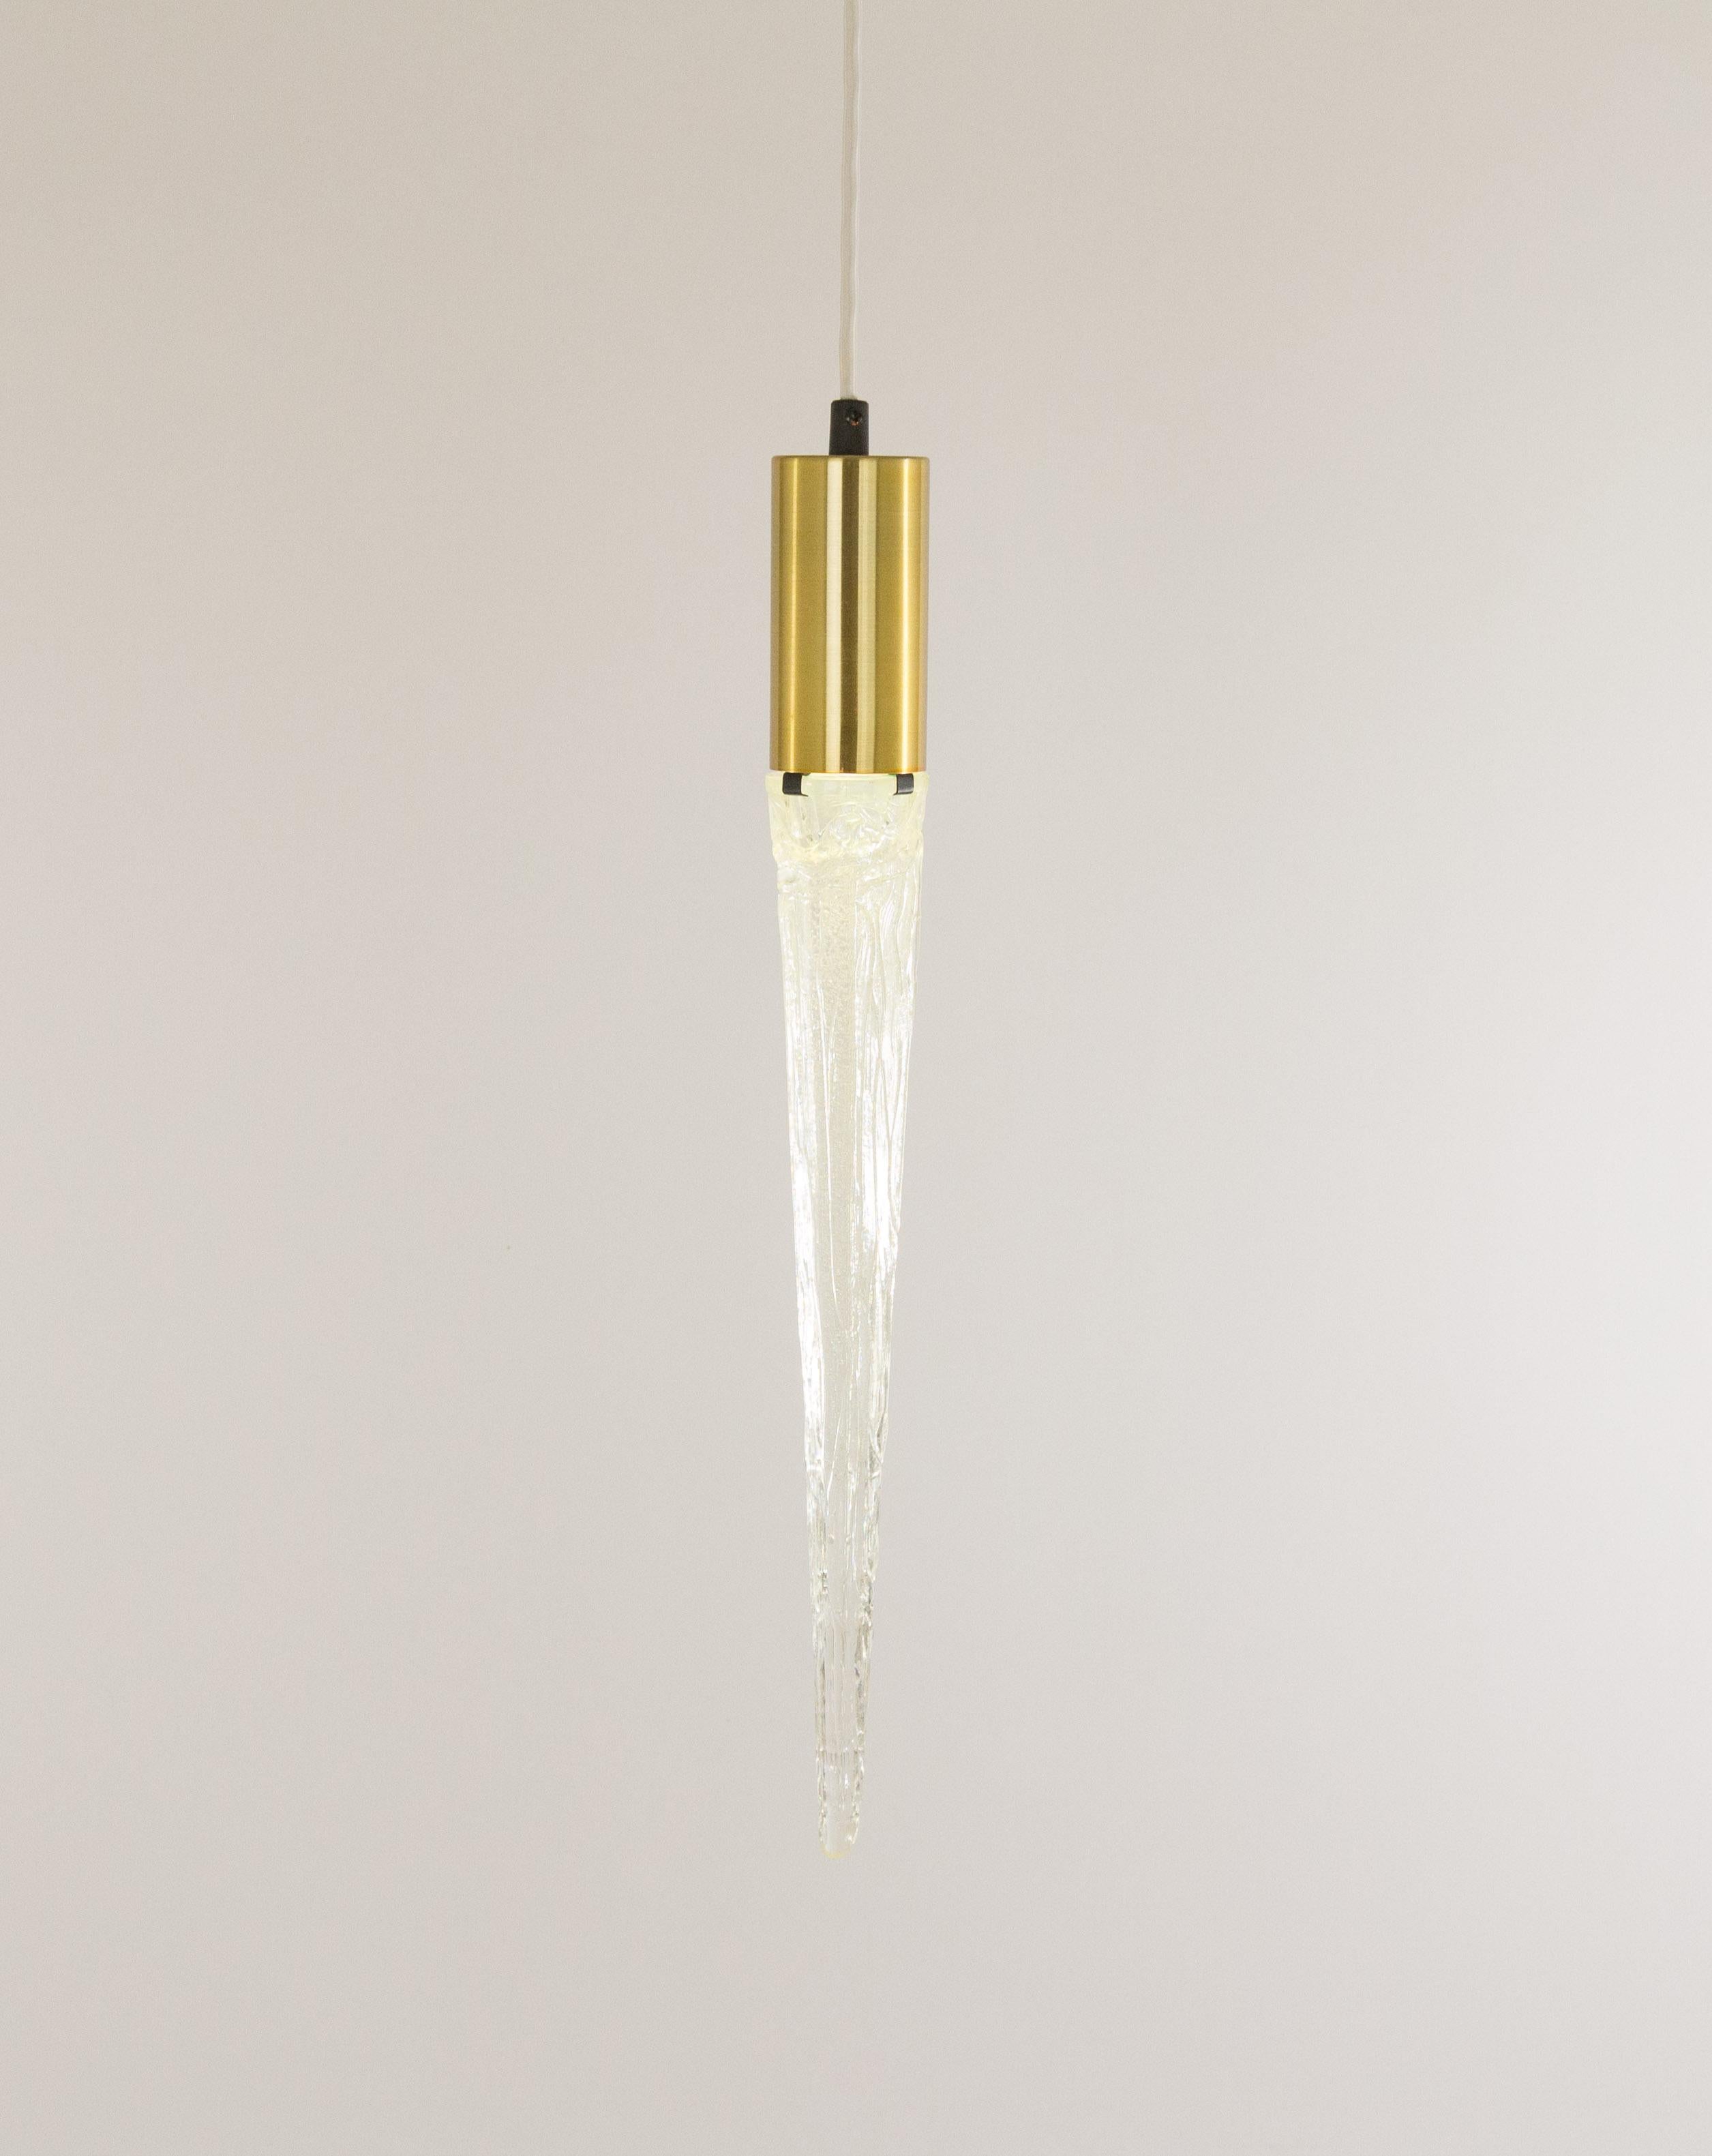 Surprising pendant in the form of an icicle, made by the Danish lighting manufacturer Vitrika, probably in the 1960s.

The lamp features a brass body -that houses the bulb mount socket- and an acrylic part. The light from the bulb is transferred